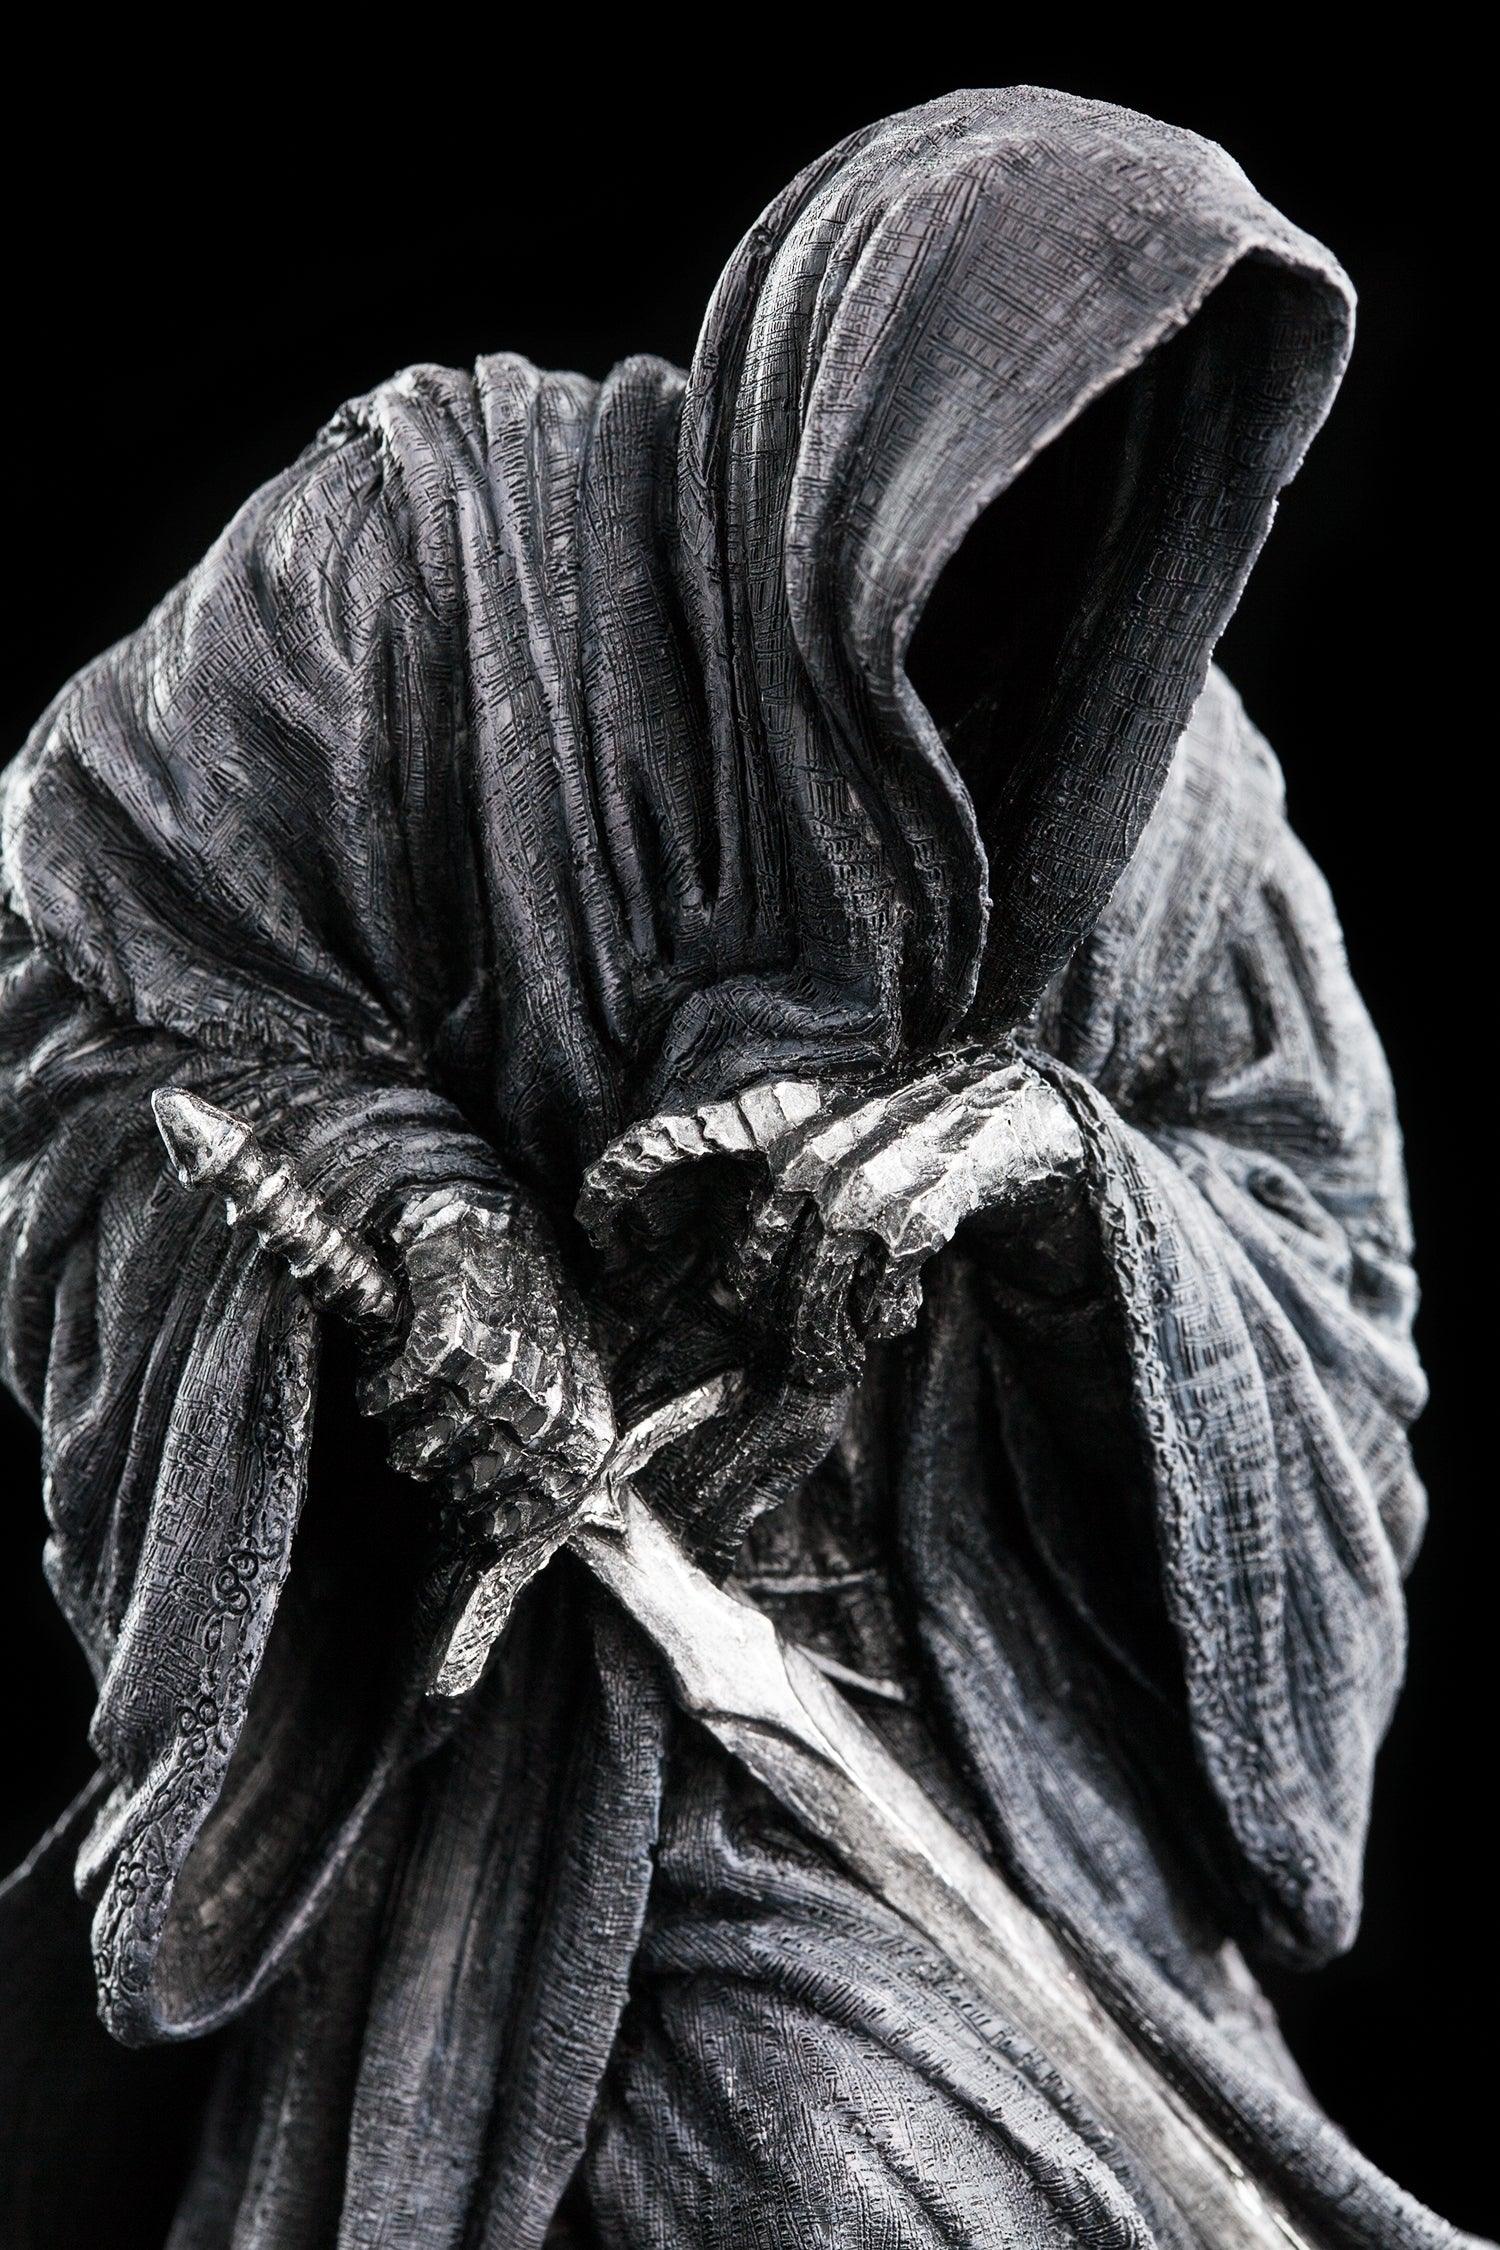 The Lord of the Rings - Ringwraith Miniature Statue Weta Titan Pop Culture